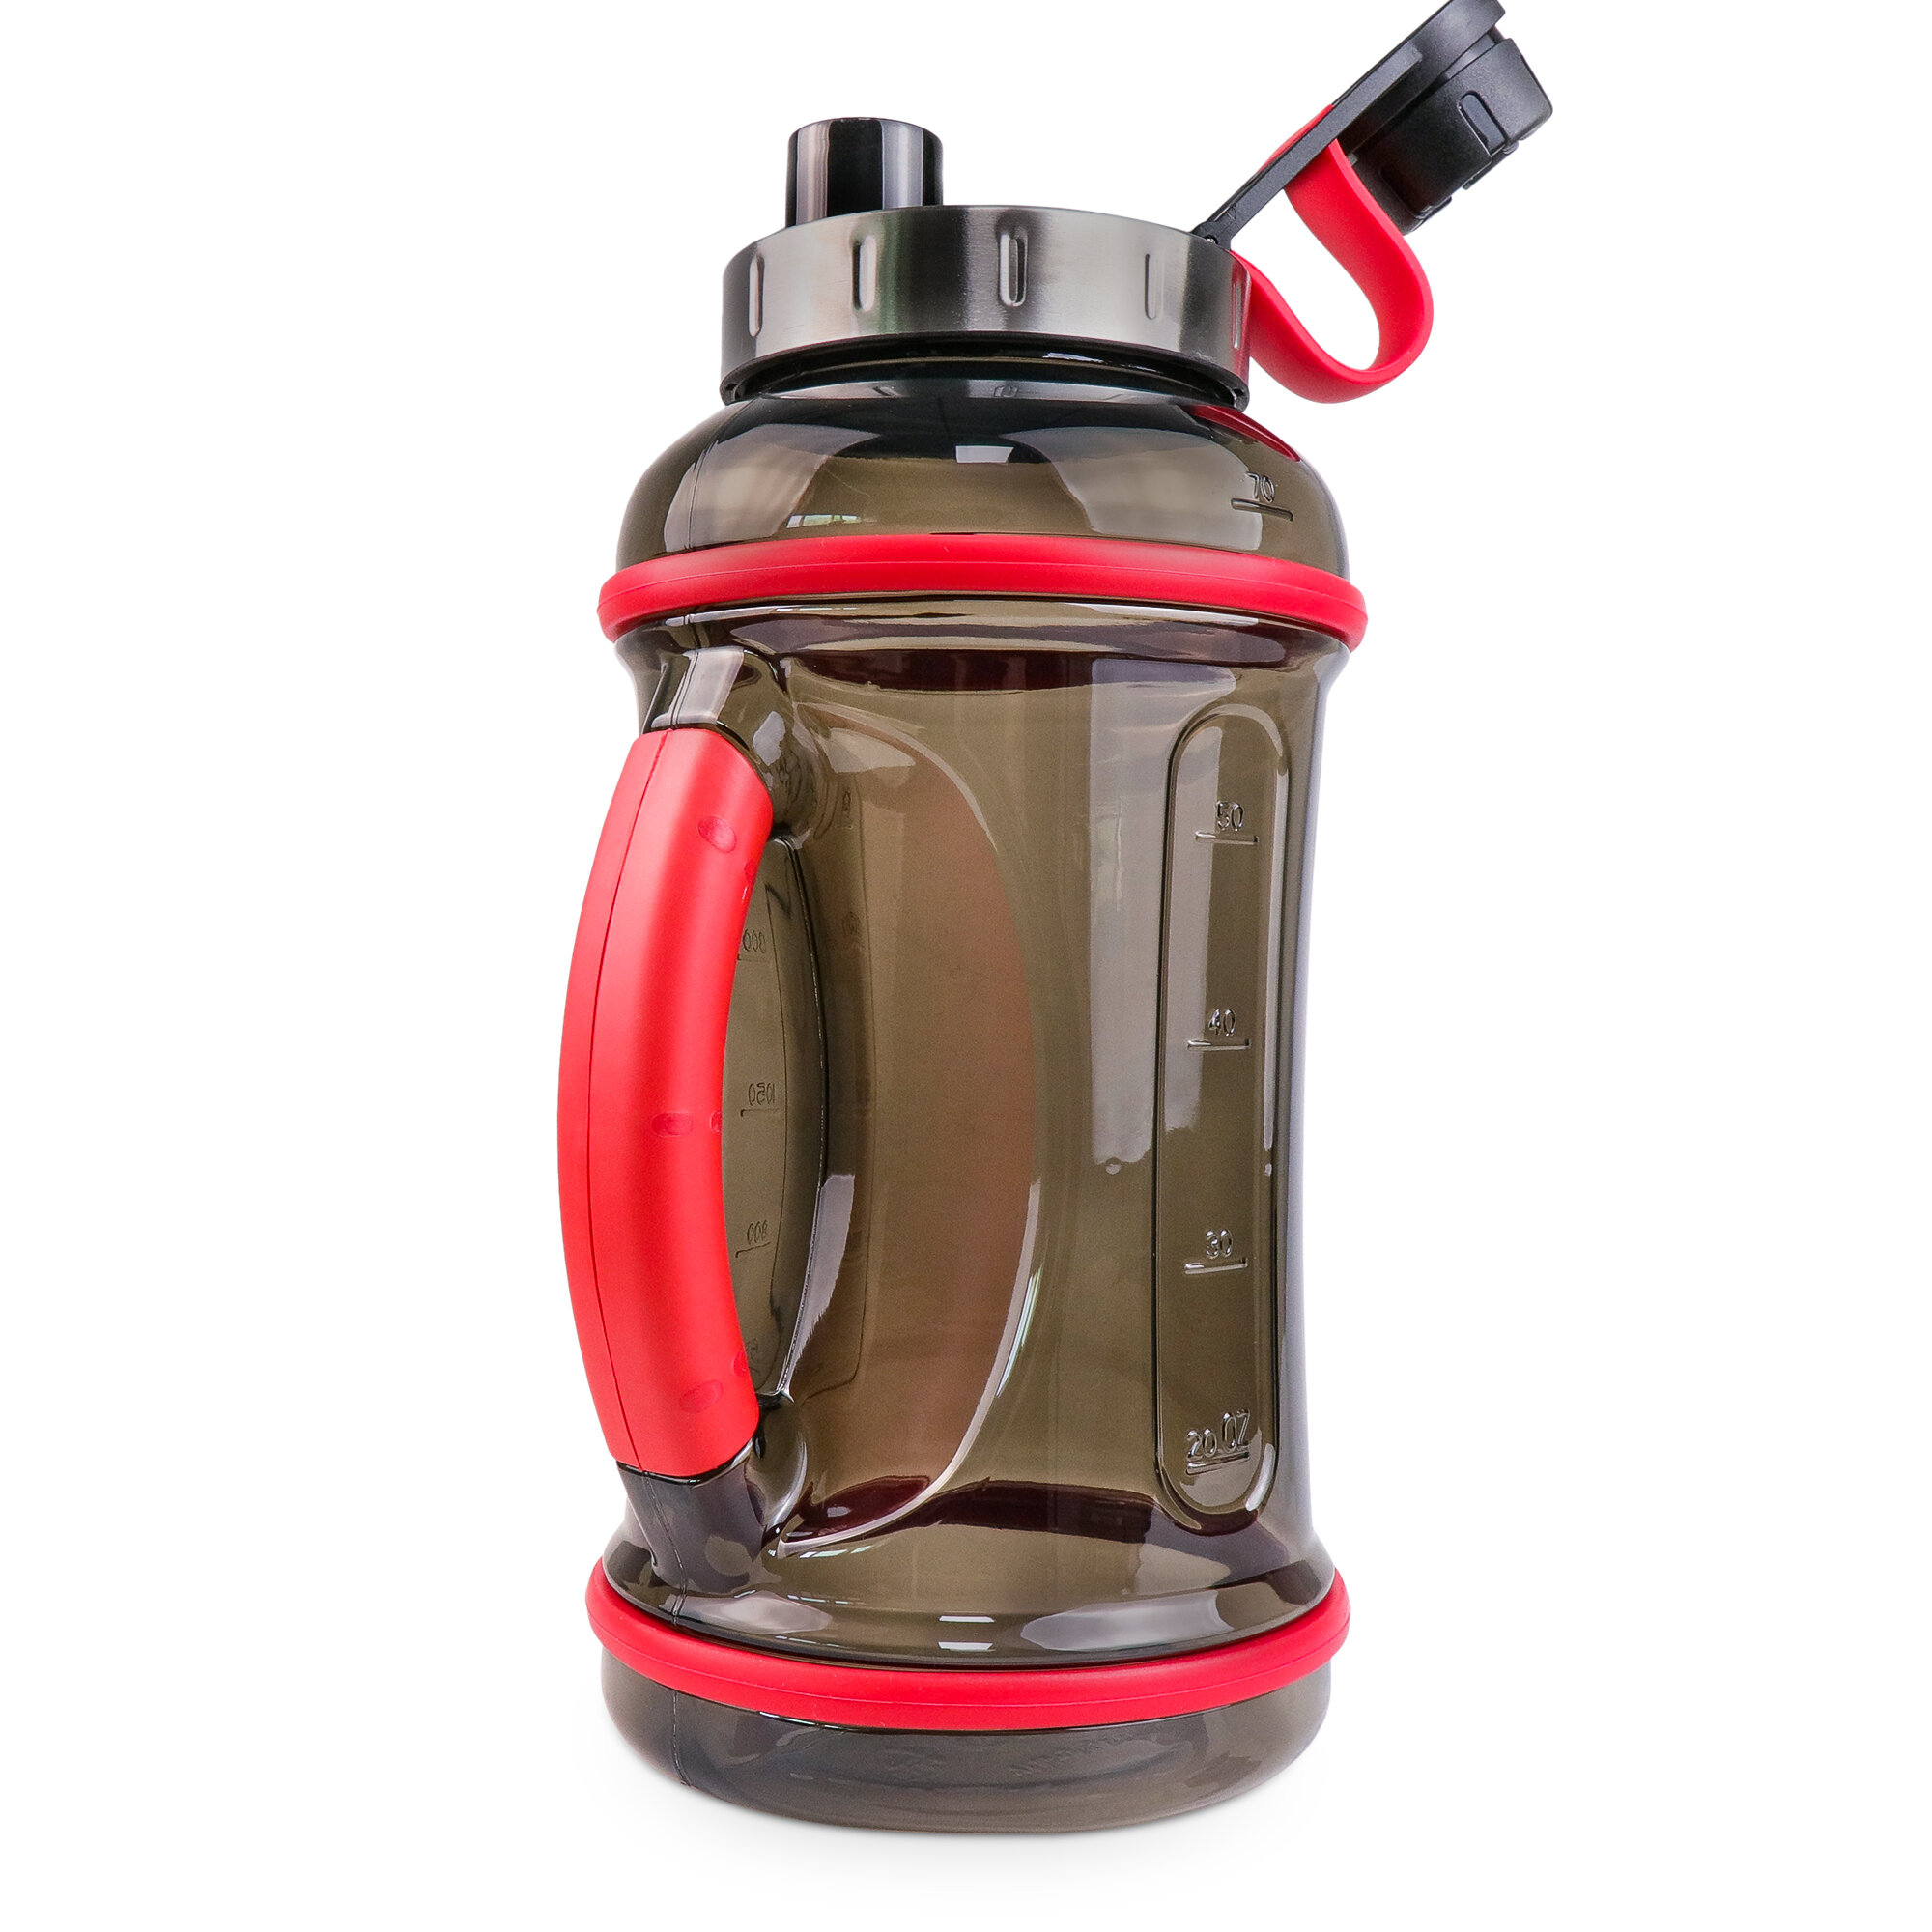 70oz Sport Water Bottle with Twist-Off Lid & Carry Handle Blue